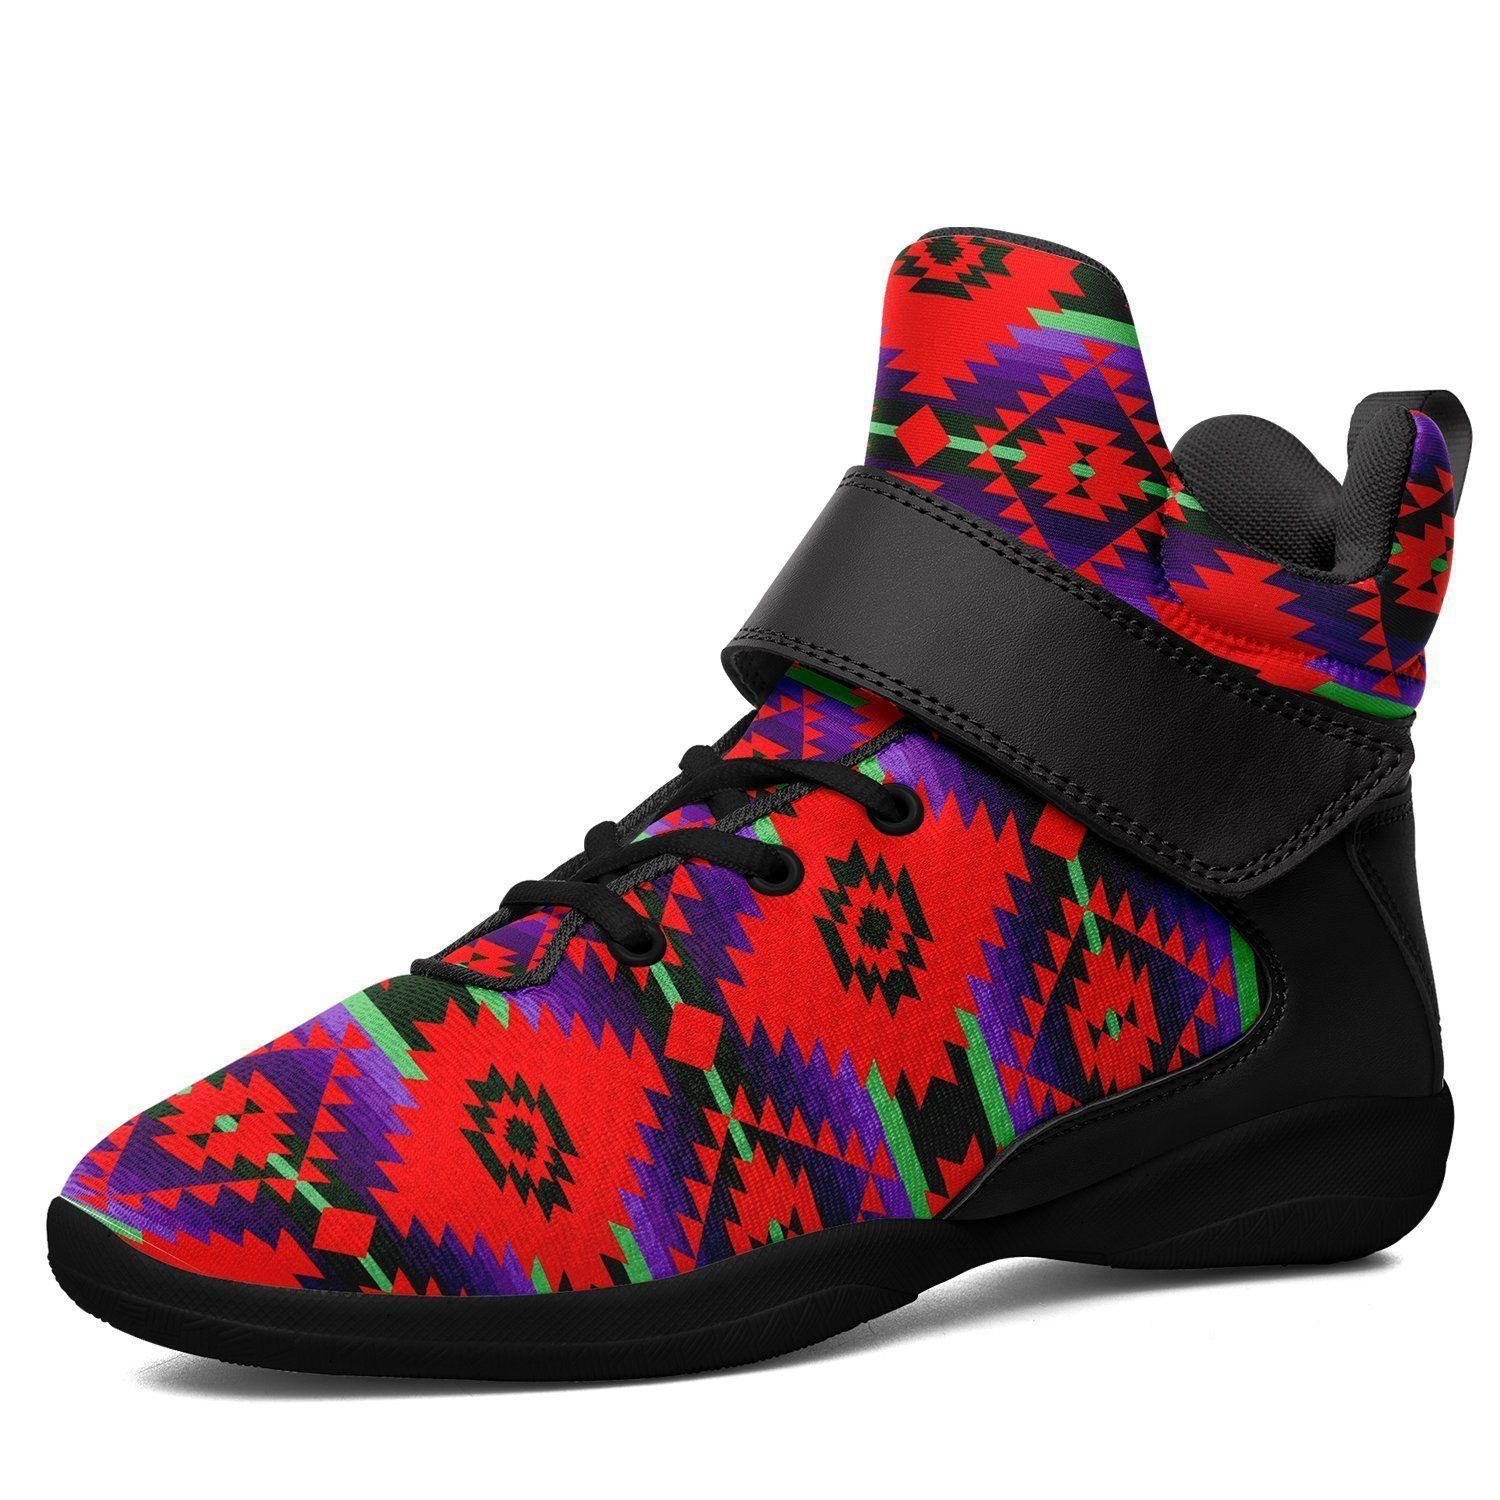 Cree Confederacy Chicken Dance Ipottaa Basketball / Sport High Top Shoes - Black Sole 49 Dzine US Men 7 / EUR 40 Black Sole with Black Strap 